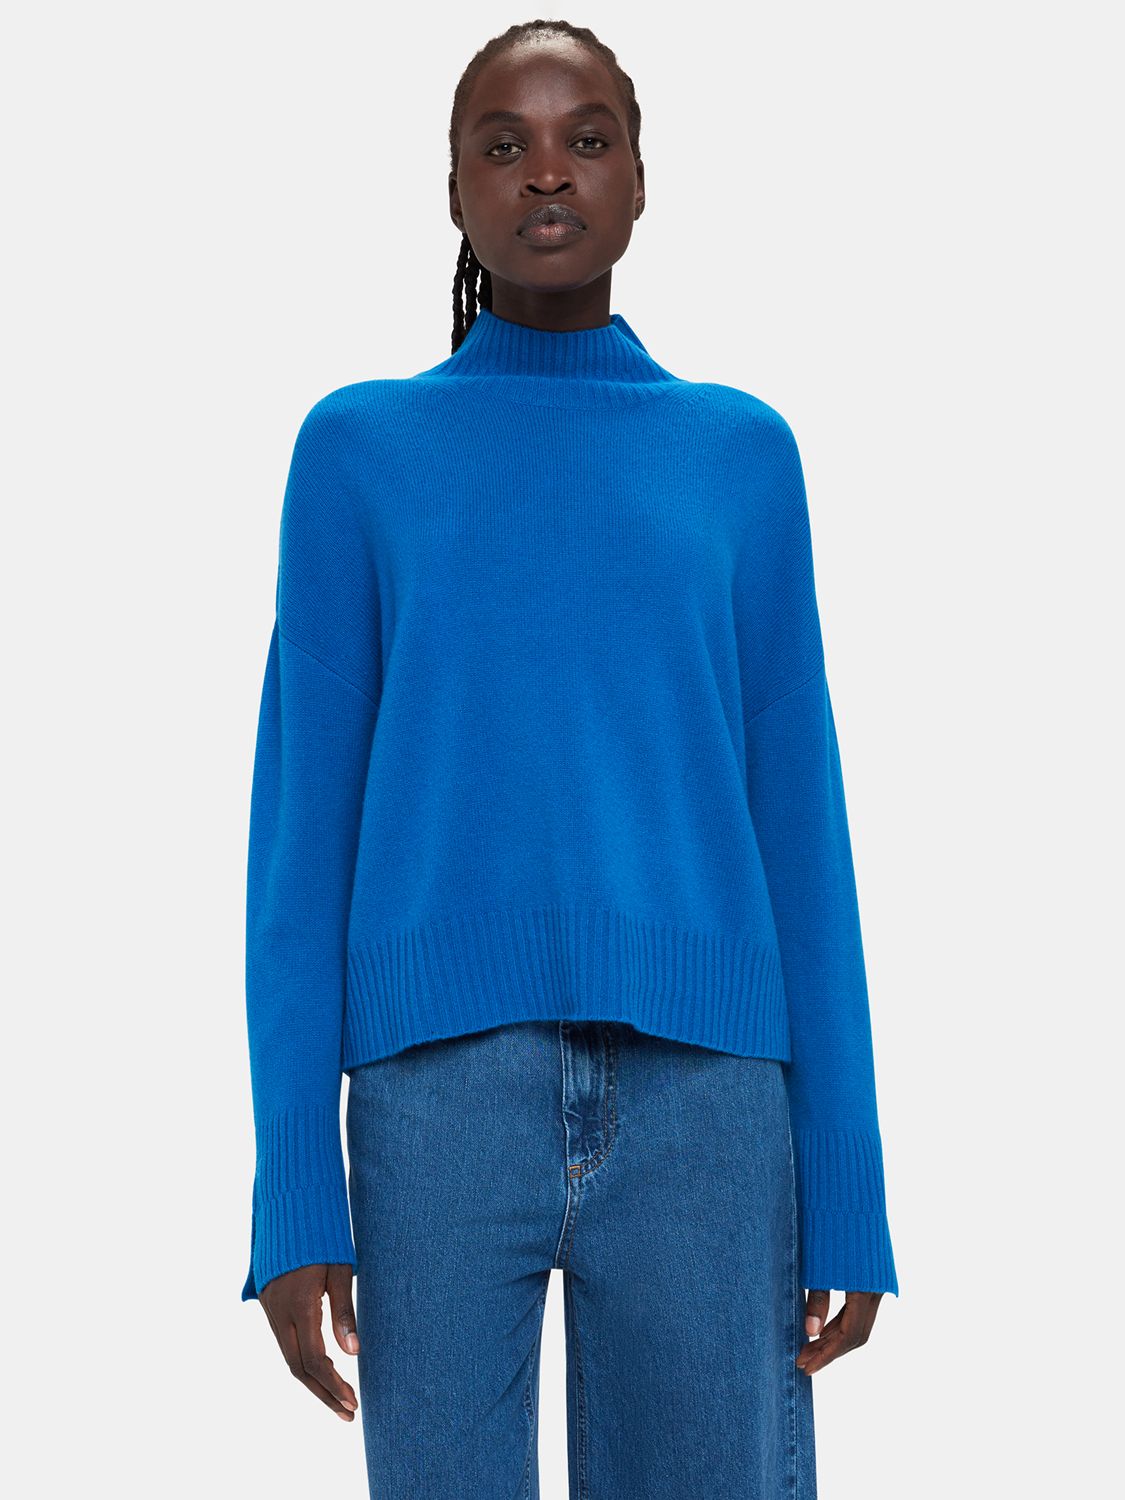 Whistles Wool Double Trim Funnel Neck Jumper, Blue at John Lewis & Partners